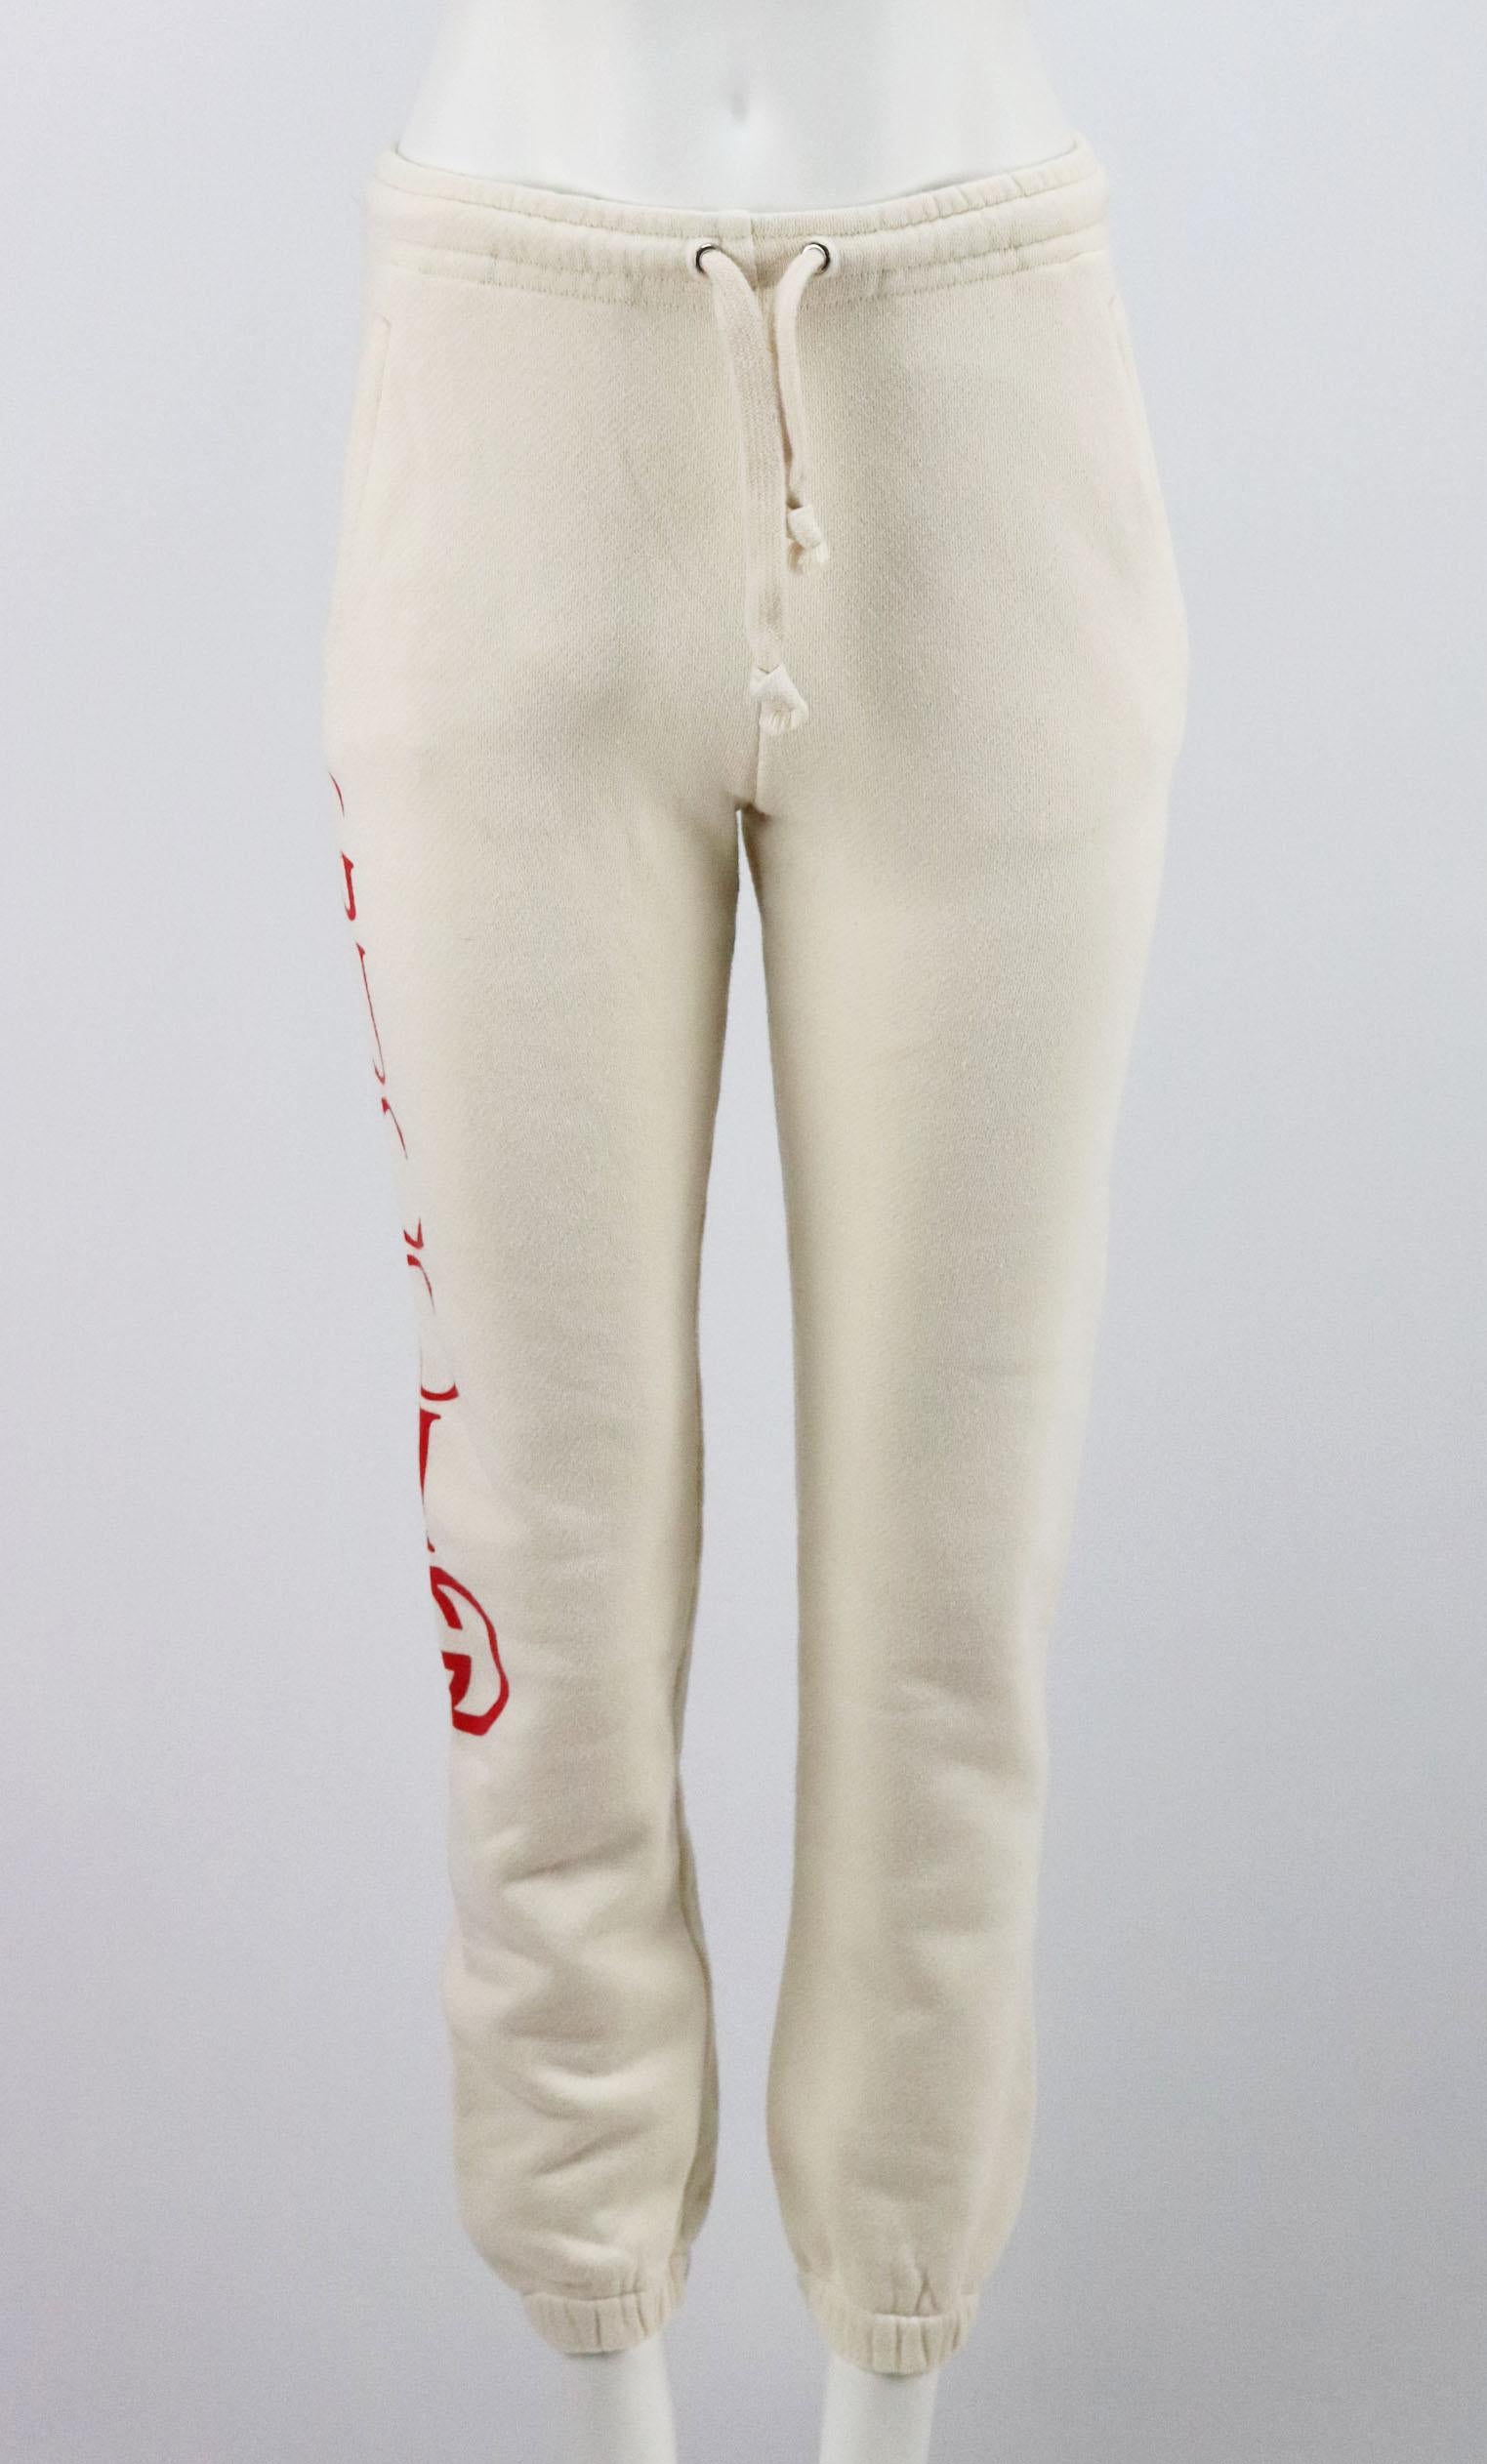 In cream with a bold logo on the side, these cotton sweatpants by Gucci are a comfy pair, youthful and cool with a tapered fit, they are ideal for workouts or off-duty dressing.
Cream and red cotton-terry.
Pull on.
100% Cotton.

Size: Small (UK 8,